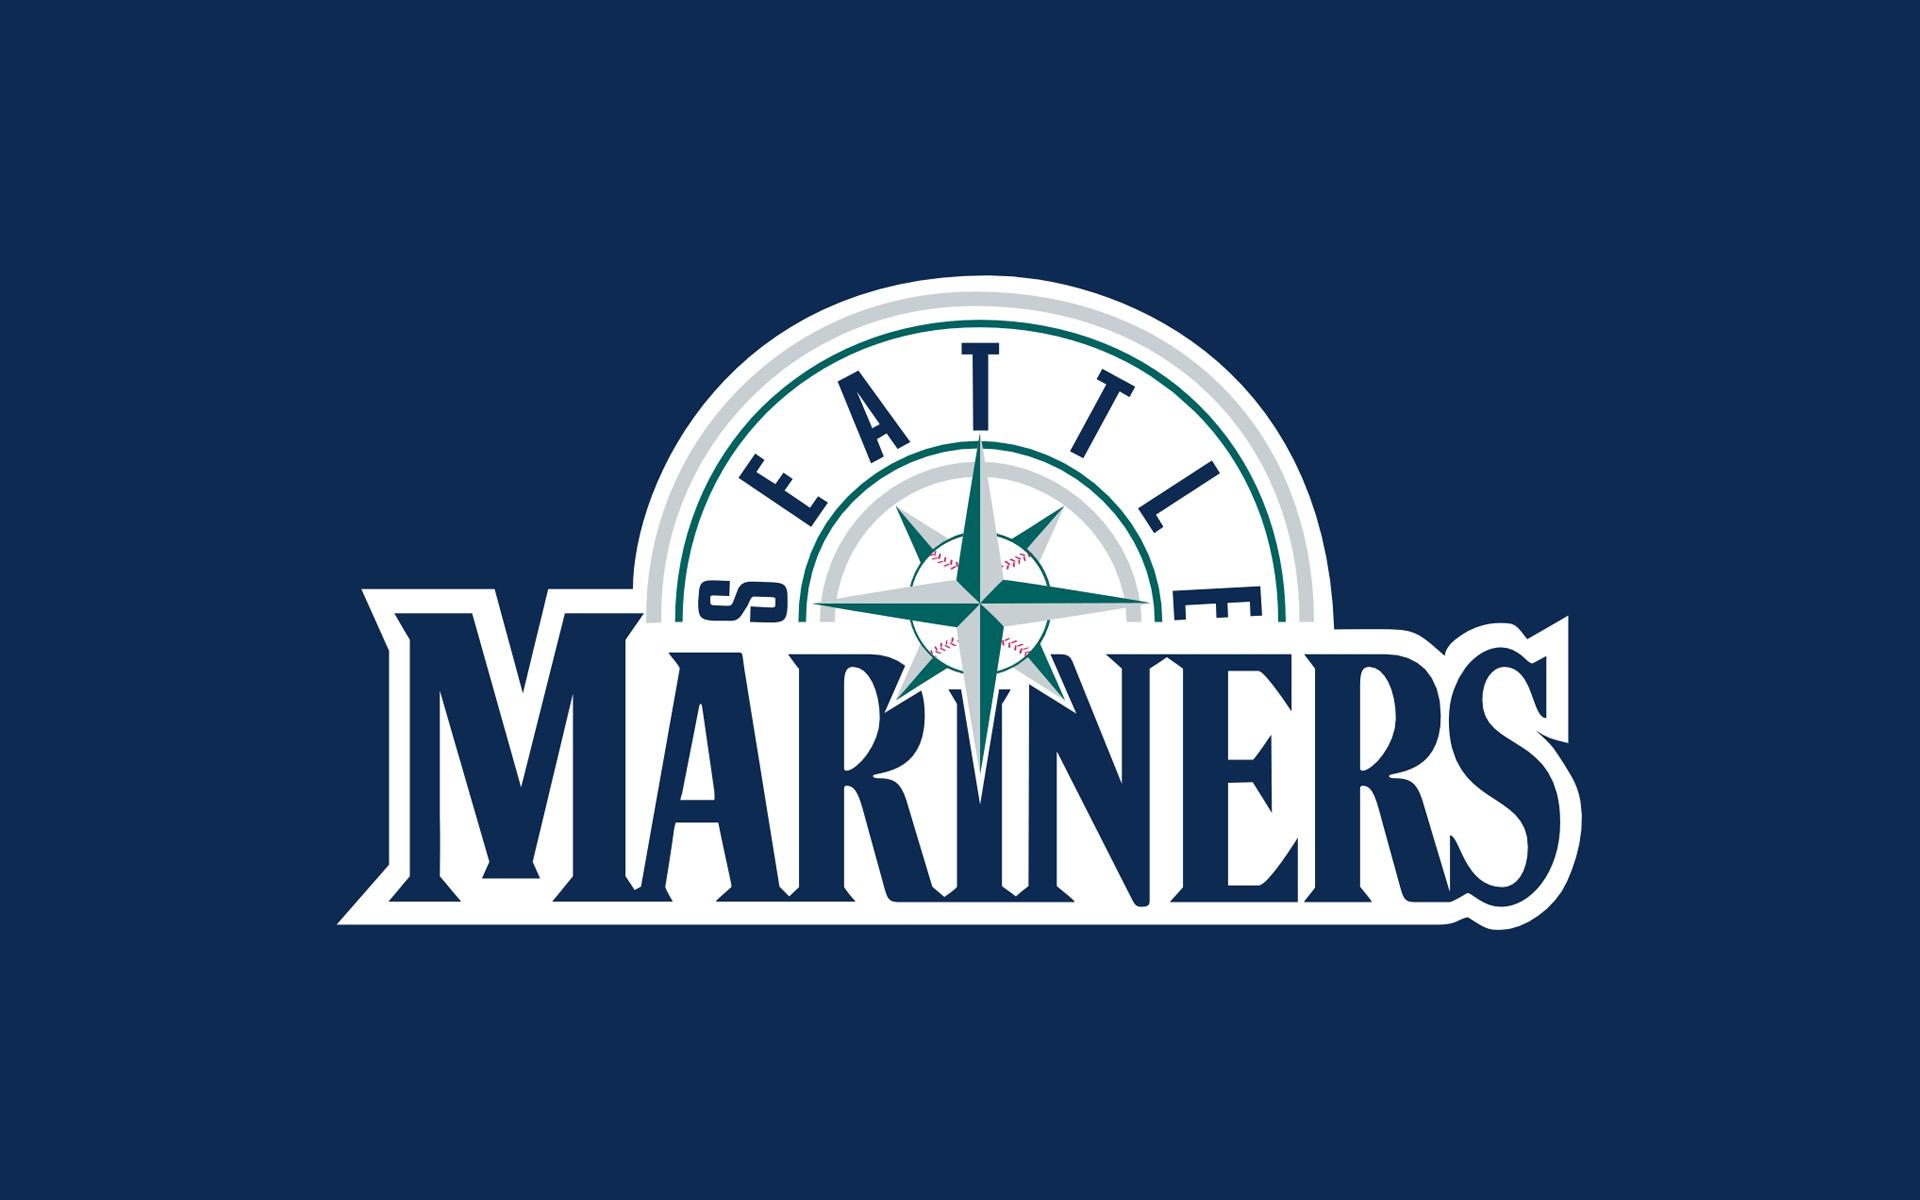 Nice wallpapers Seattle Mariners 1920x1200px